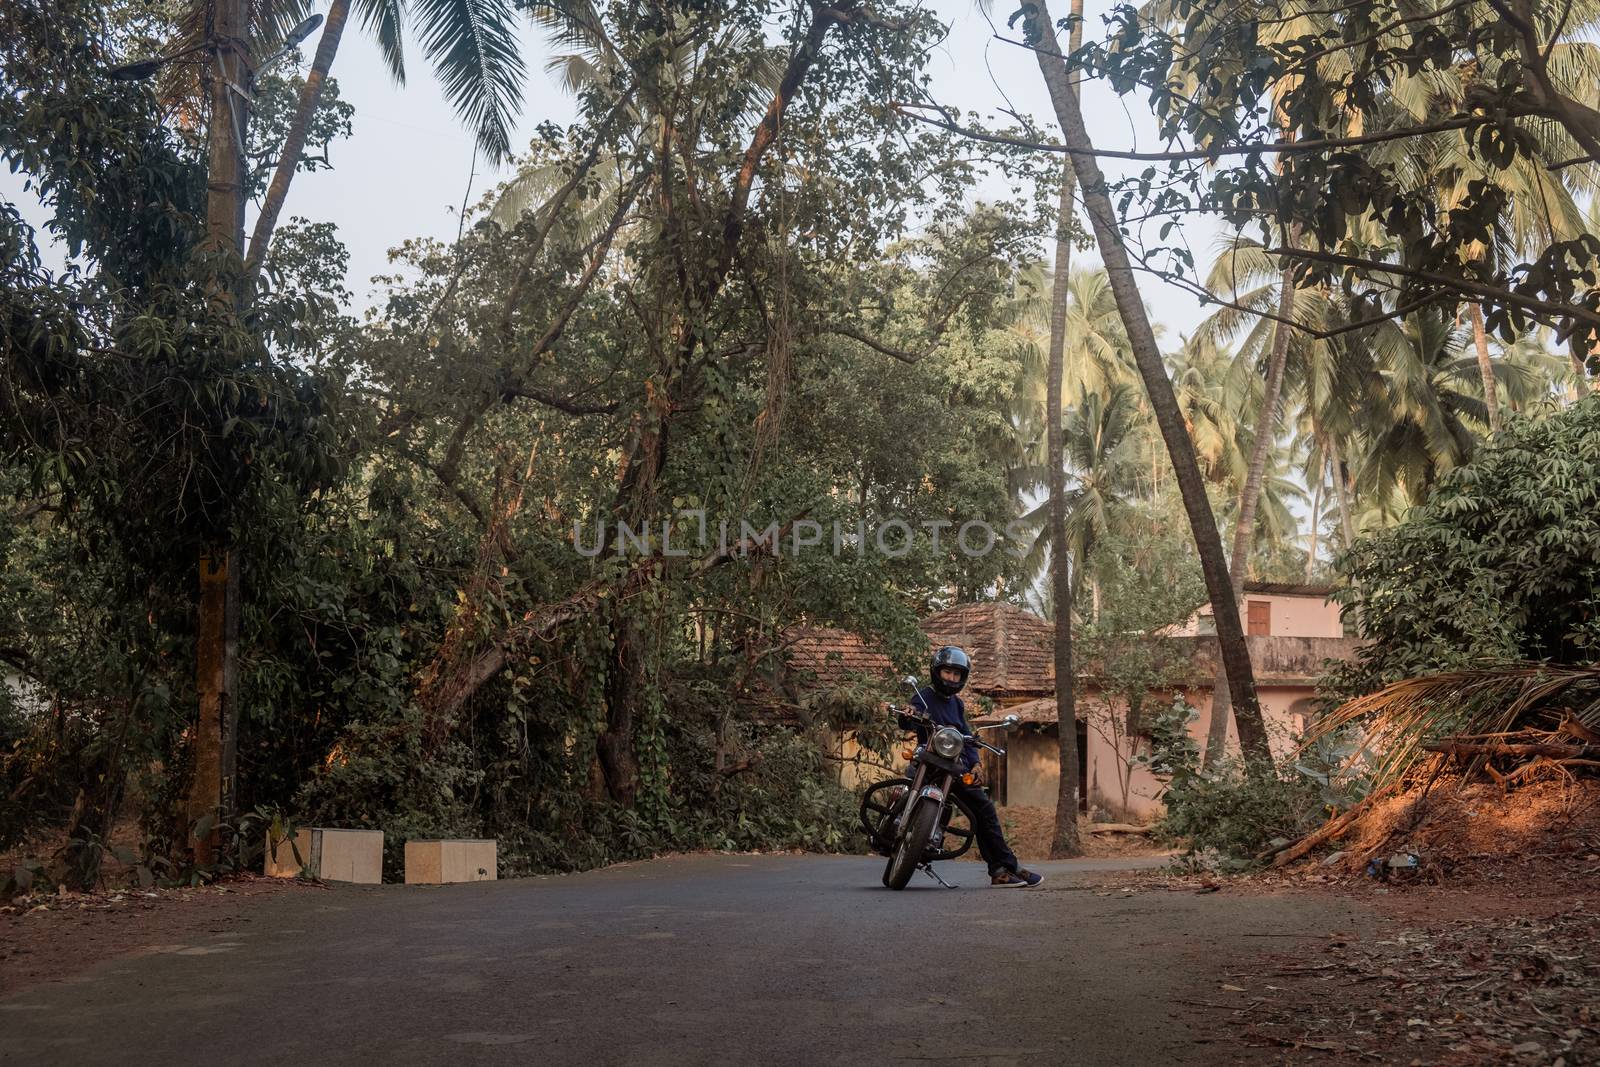 A Man On Motorcycle On Road in GOA village